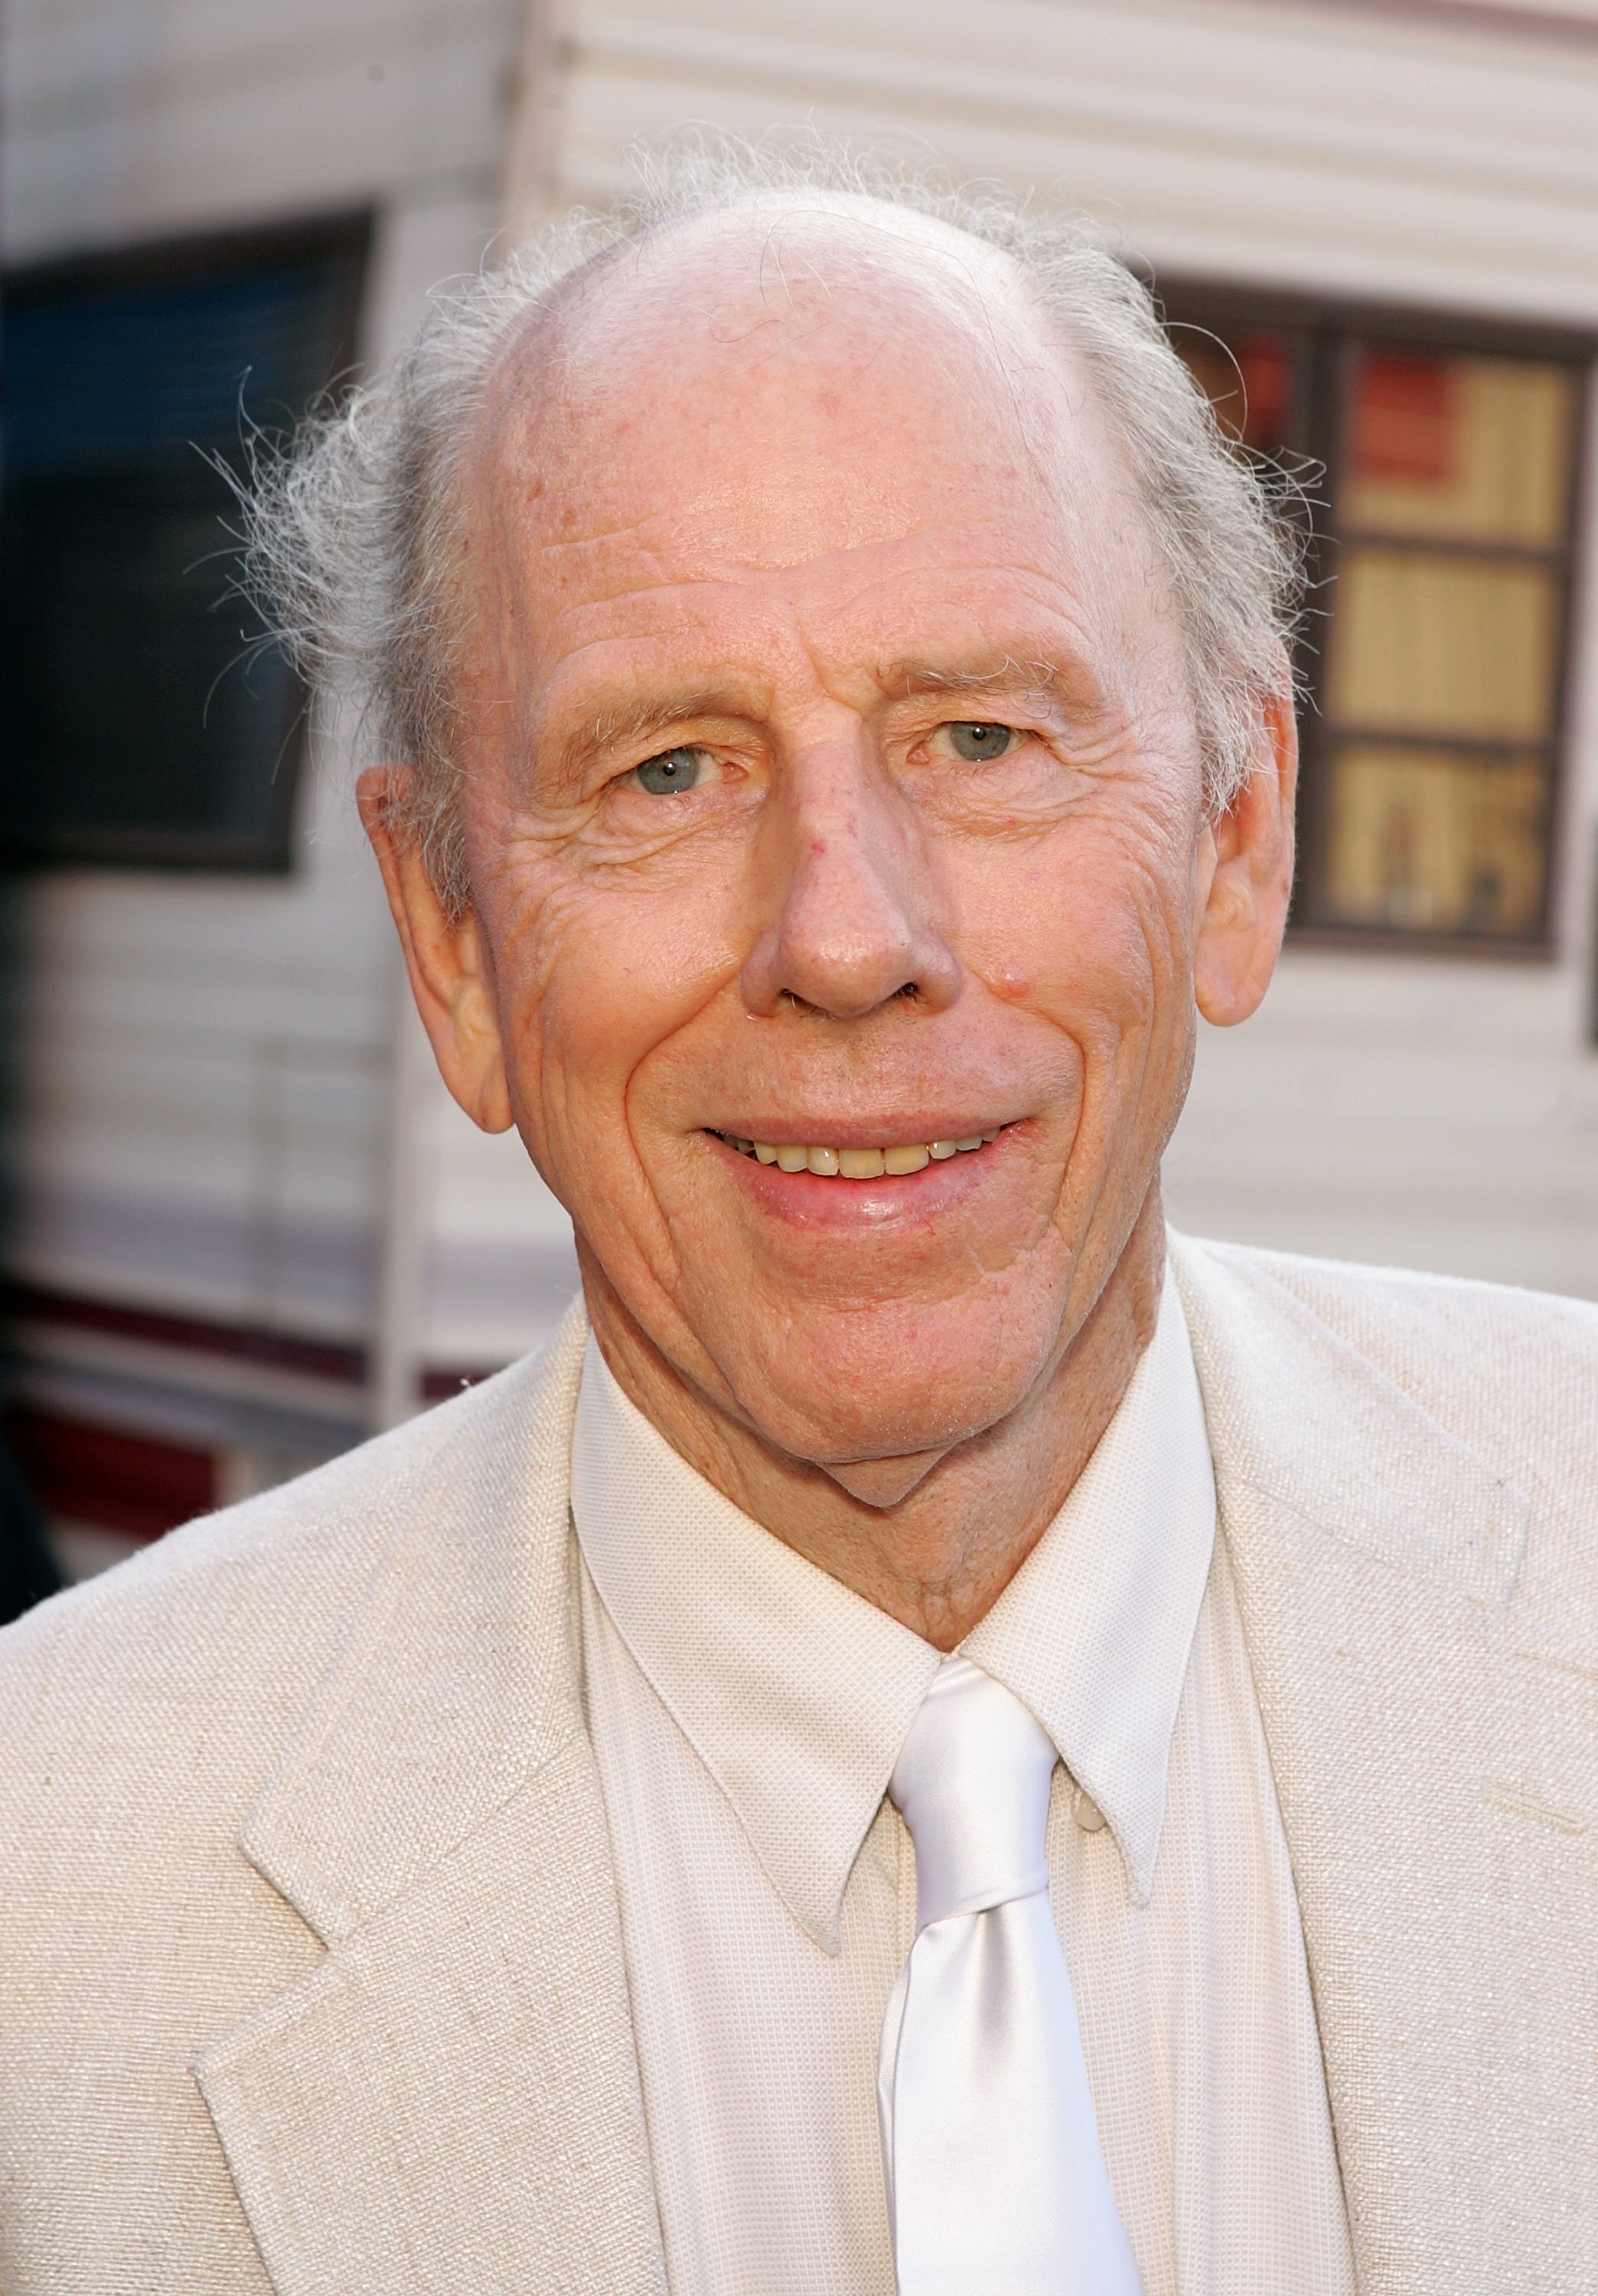 Rance Howard arrives at the premiere of "Cinderella Man" at Gibson Amphitheatre at Universal CityWalk on May 23, 2005 | Photo: Getty Images